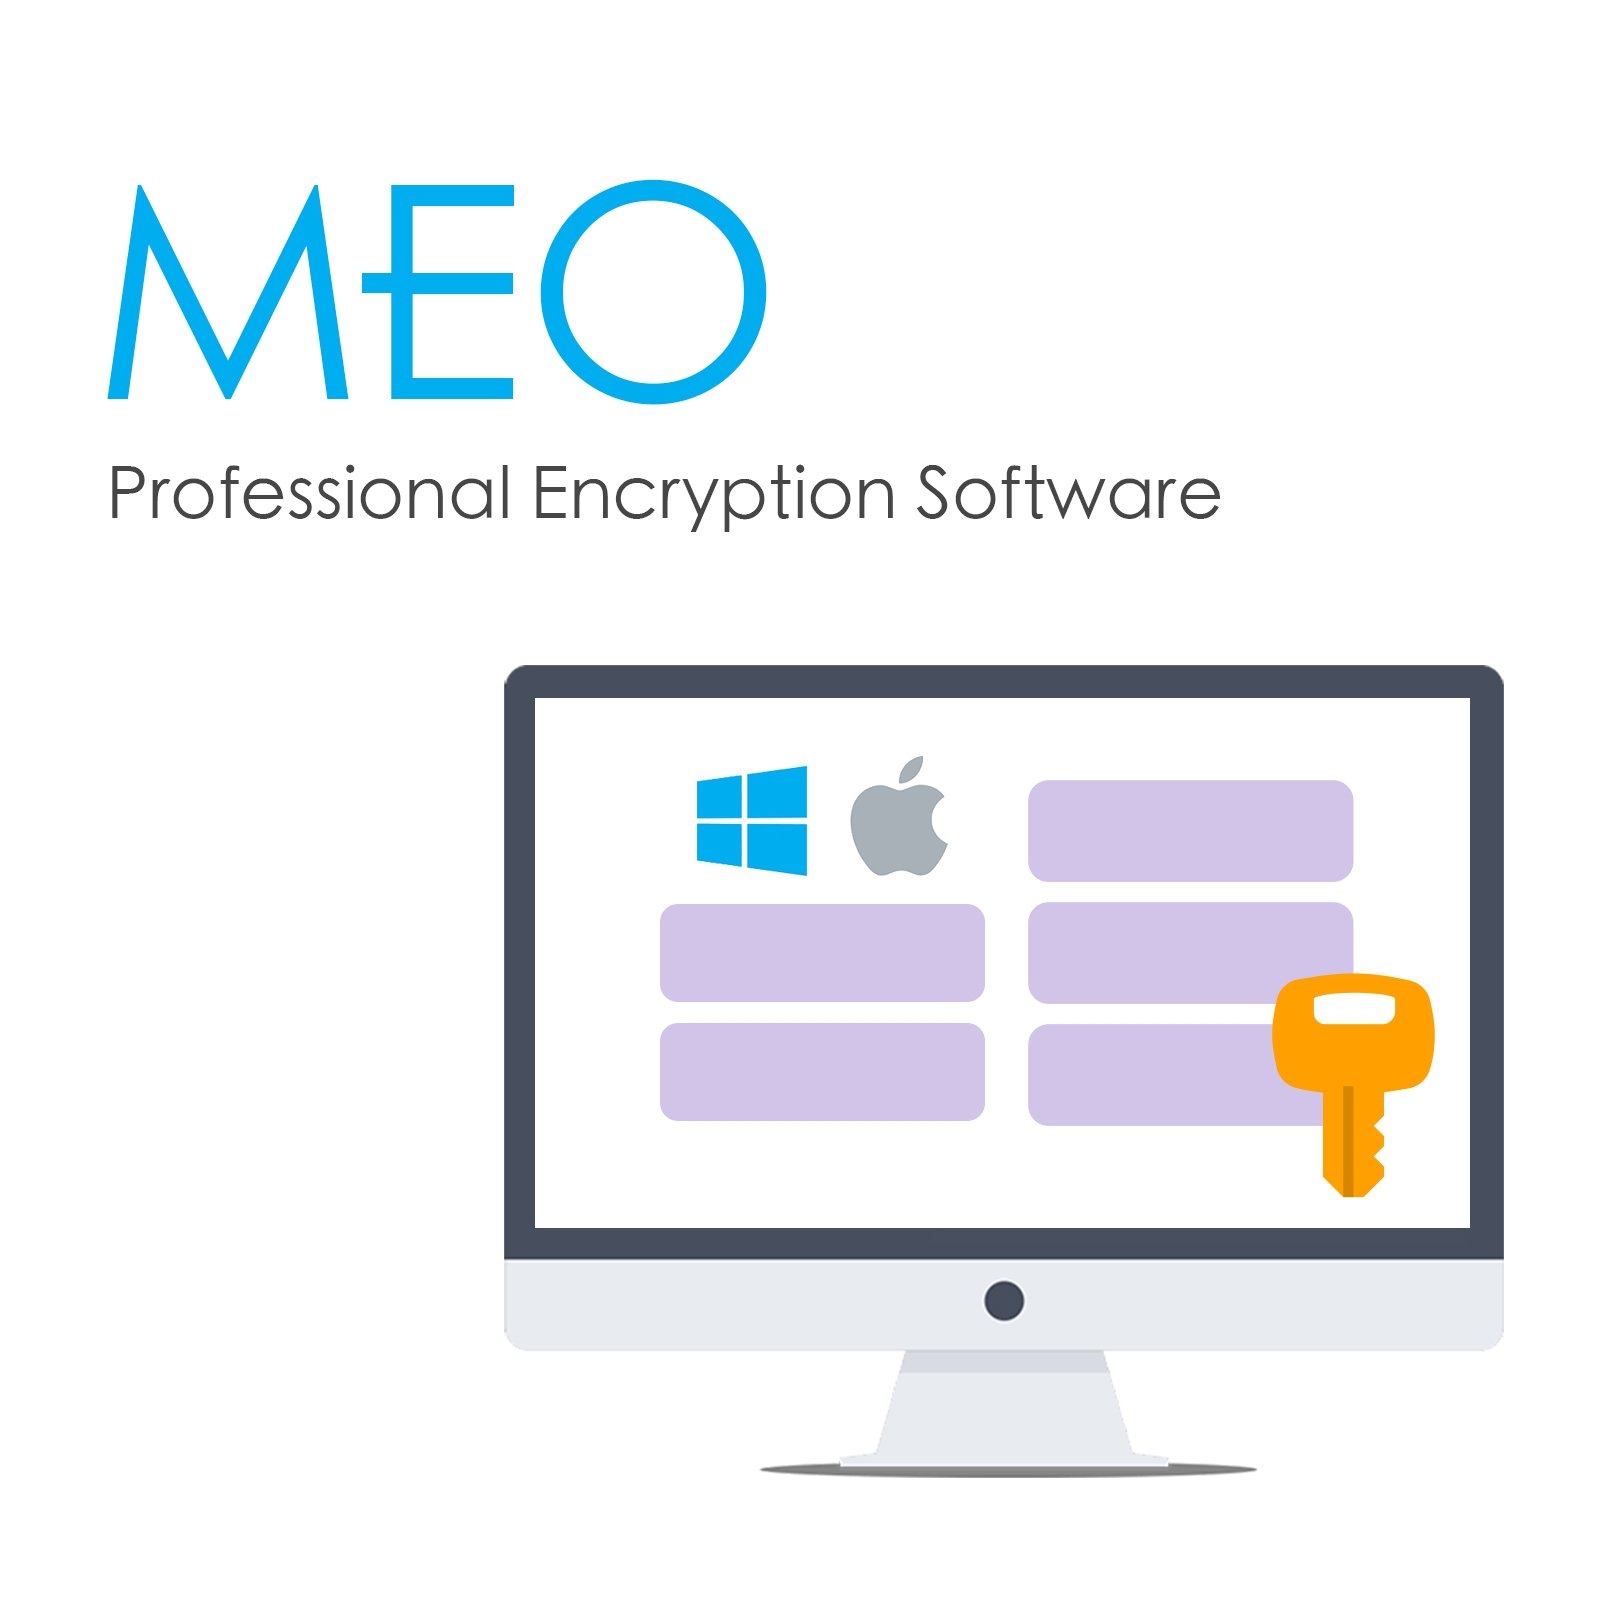 MEO Professional Encryption Software (Single License)